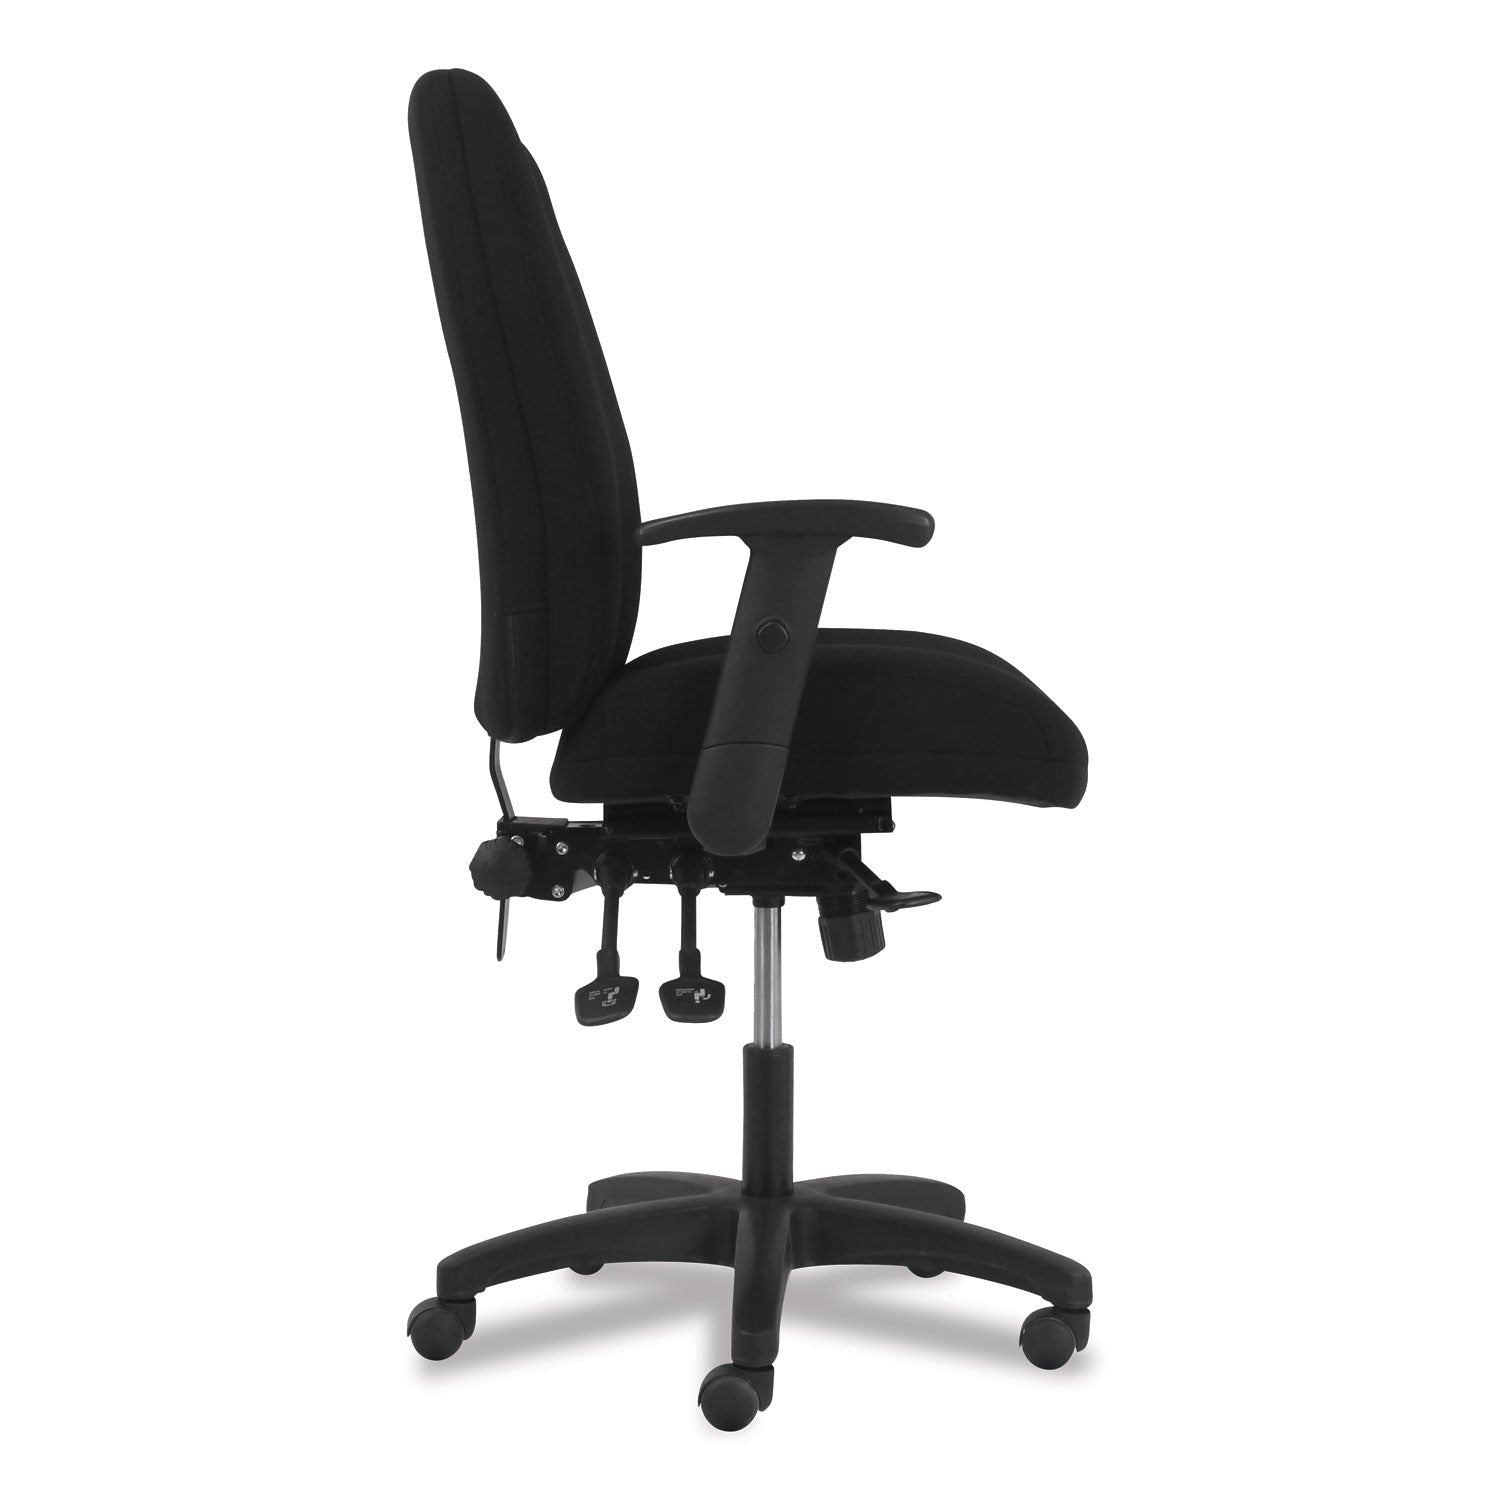 network-high-back-chair-supports-up-to-250-lb-183-to-228-seat-height-black_honvl283a2va10t - 3